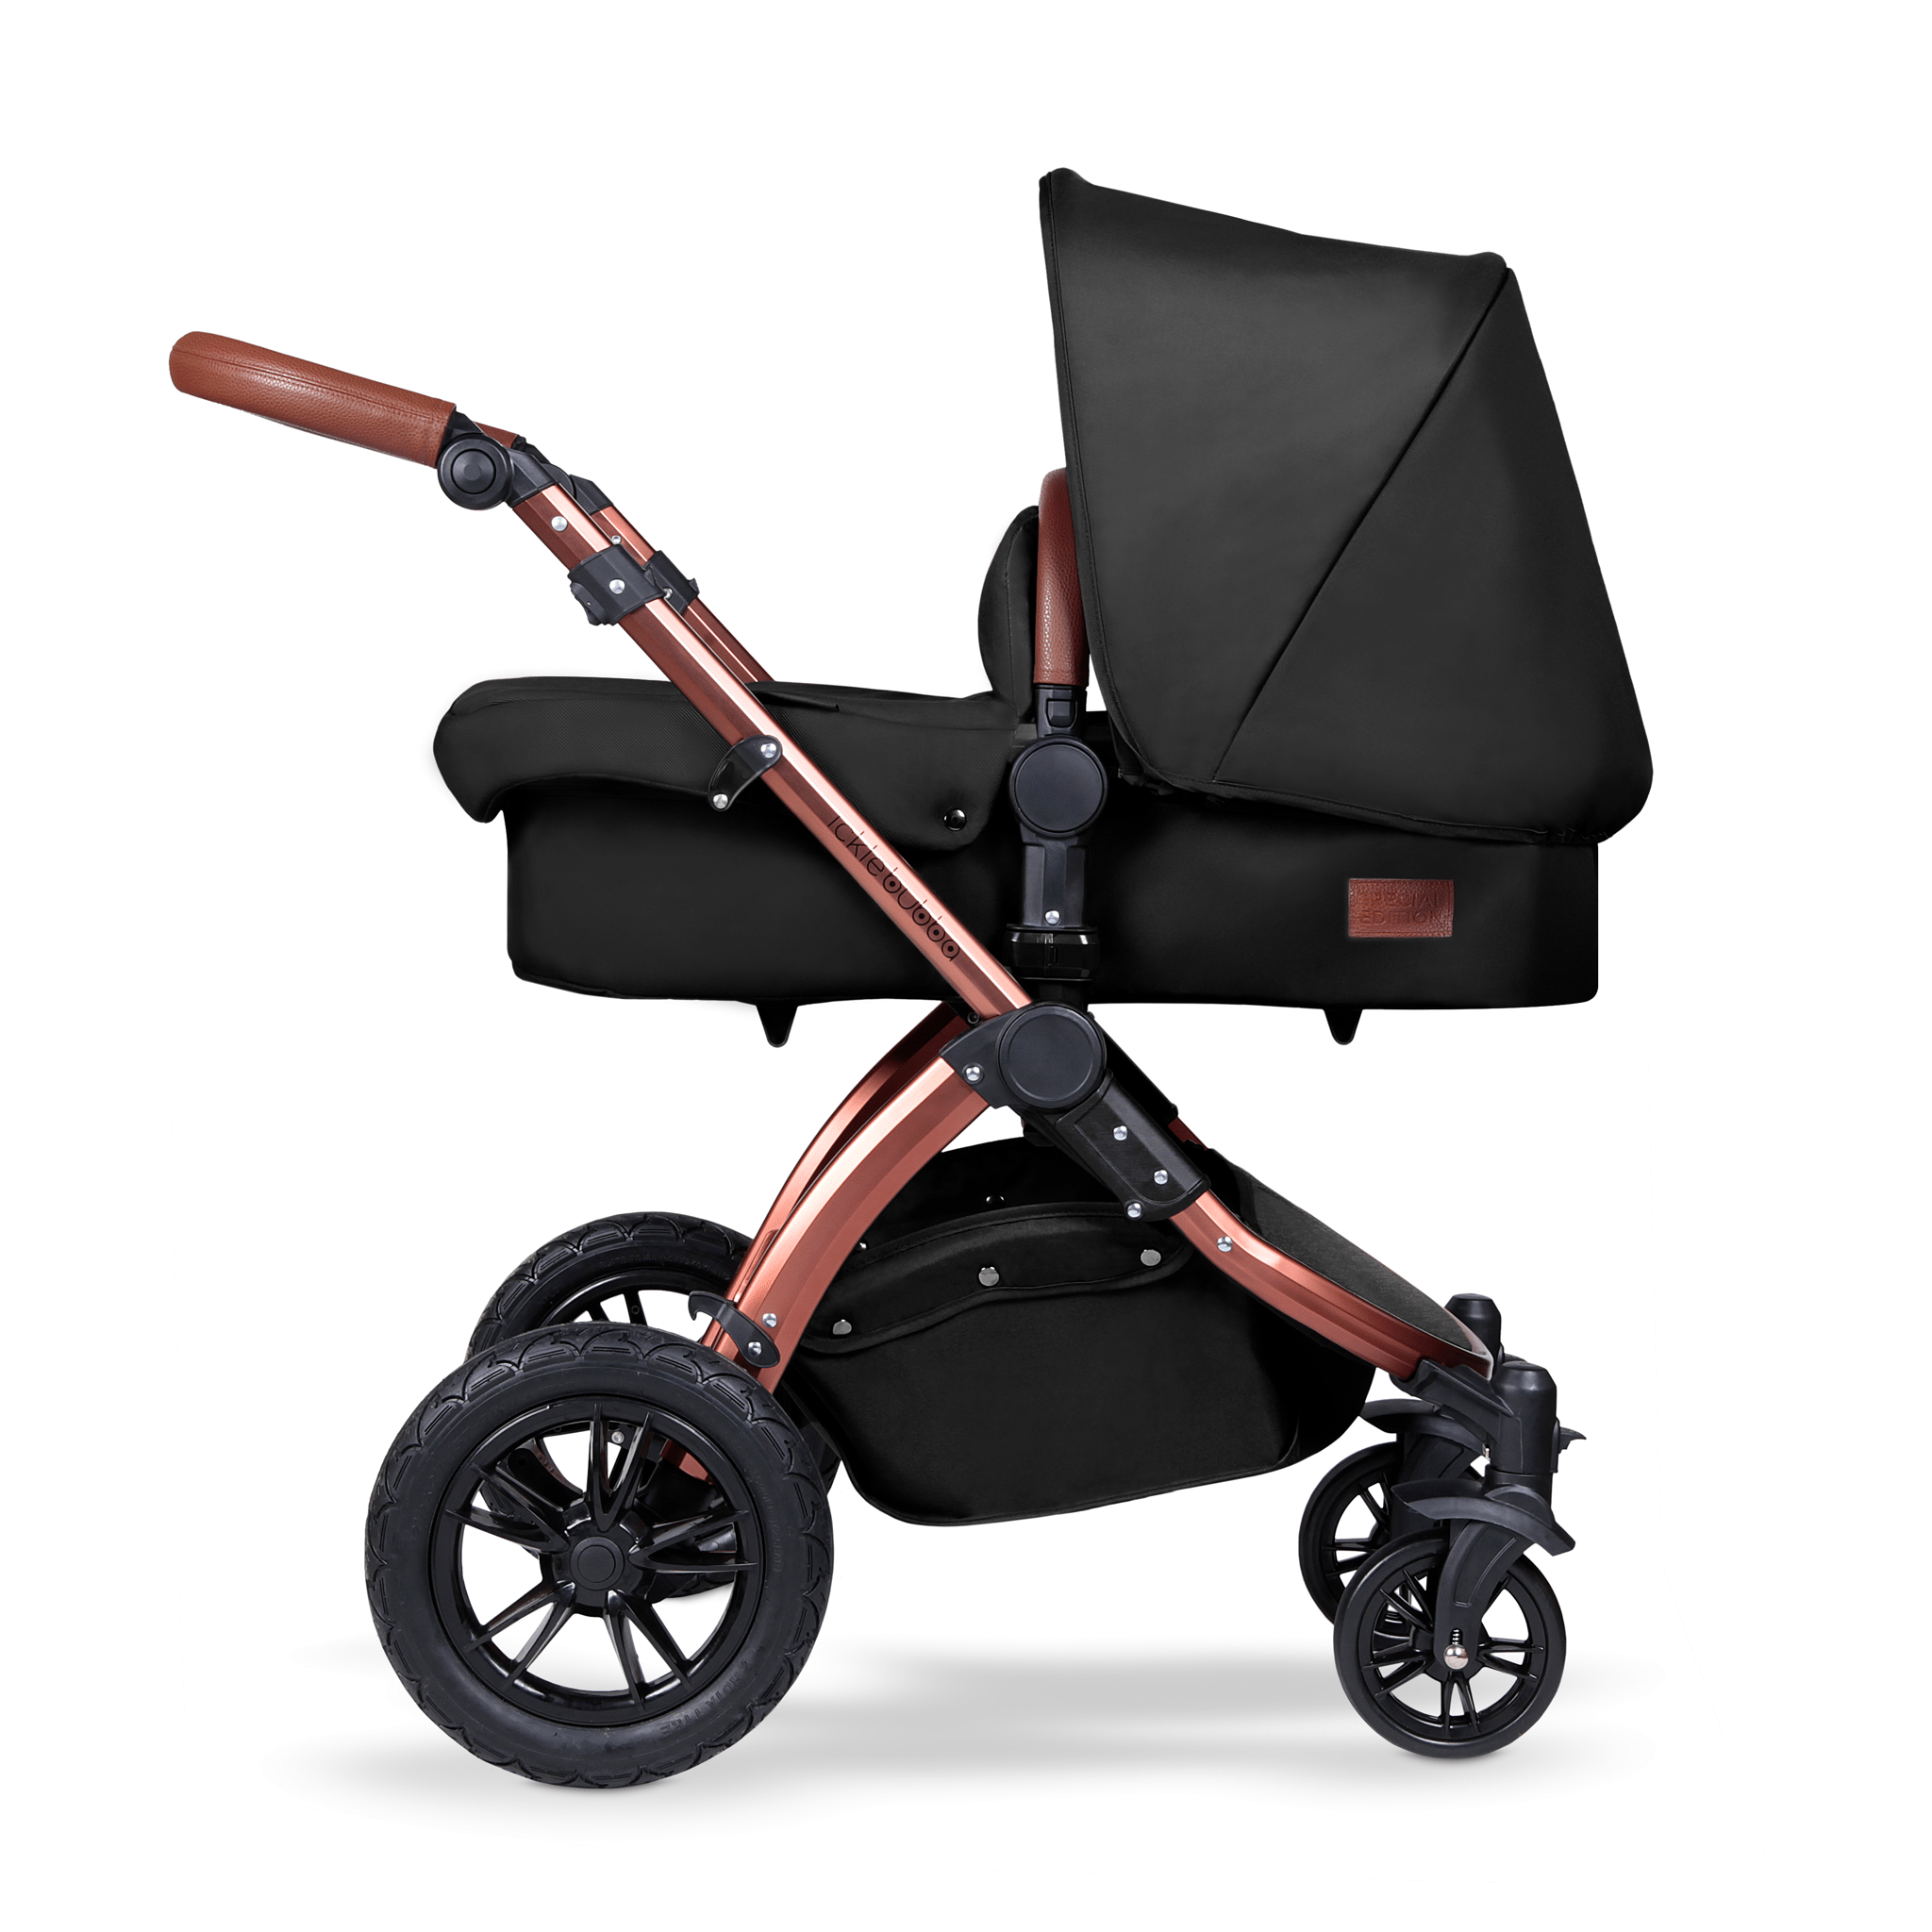 Ickle Bubba baby pushchairs Ickle Bubba Stomp V4 2-in-1 Pushchair Bronze/Midnight 10-004-000-021